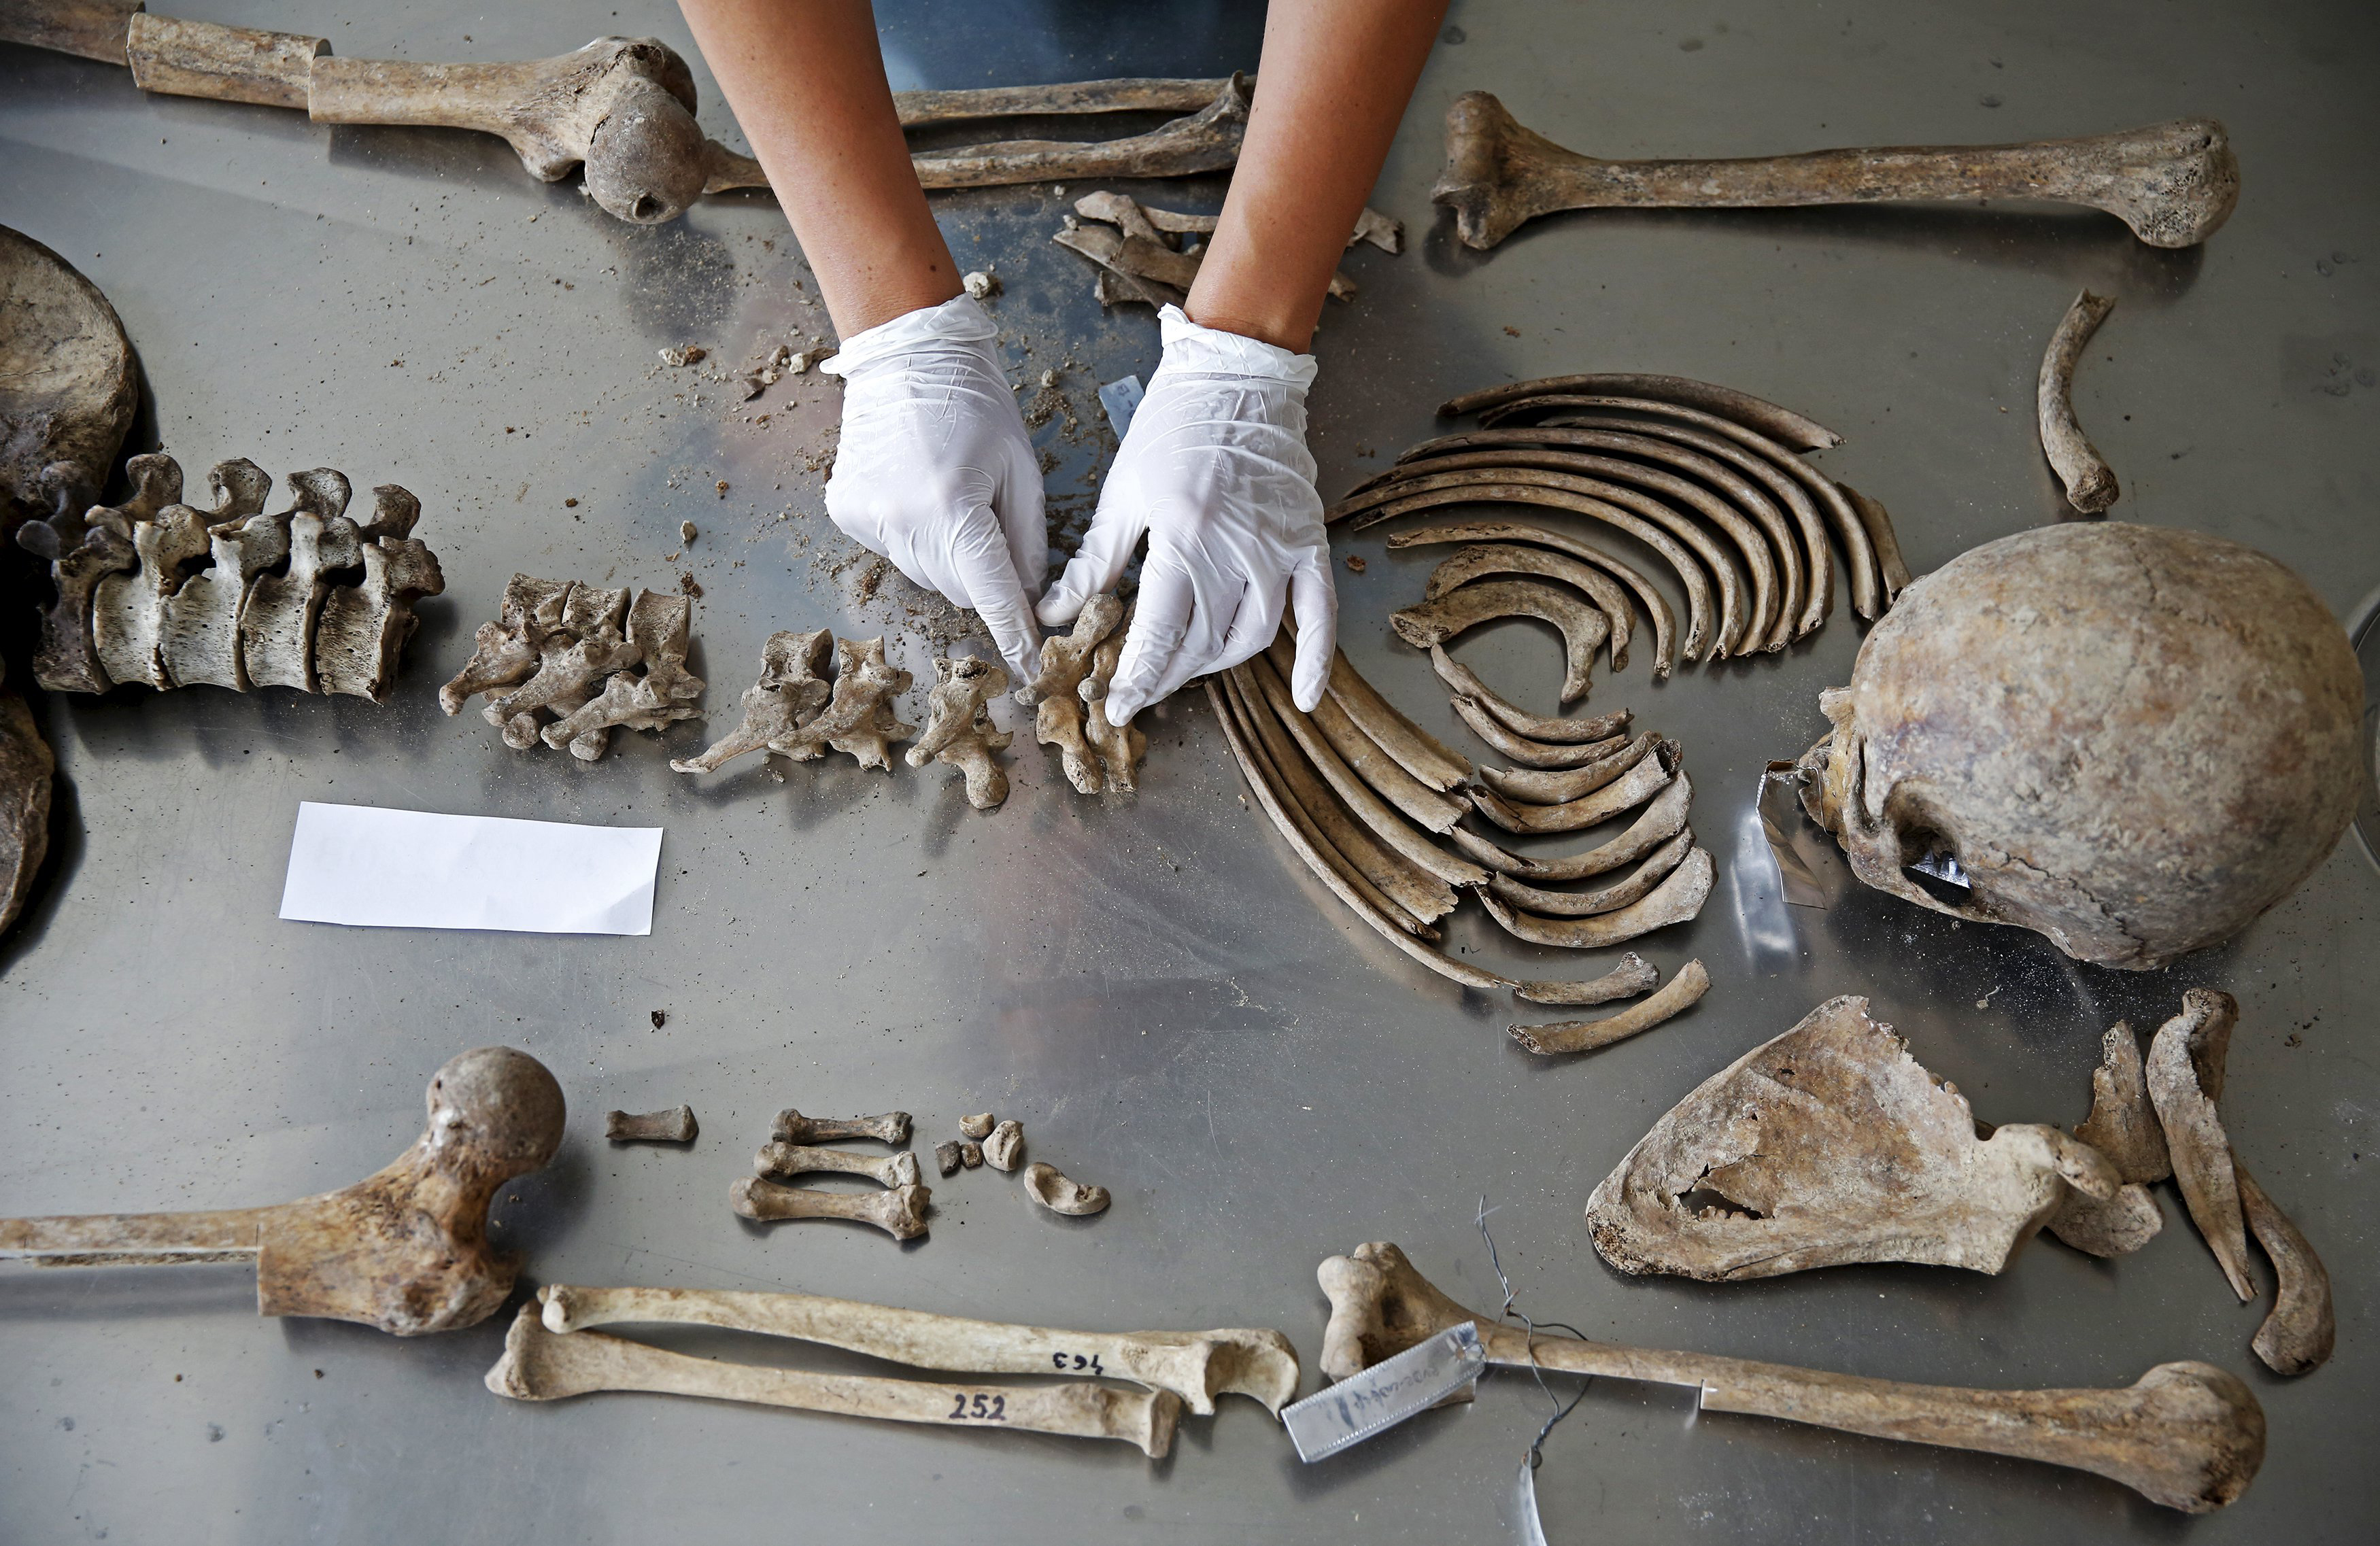 Senior Forensic Anthropologist Dragana Vucetic of the International Commission on Missing Persons (ICMP) works to attempt to identify the remains of a victim of the Srebrenica massacre, at the ICMP centre near Tuzla, Bosnia on June 11, 2015.